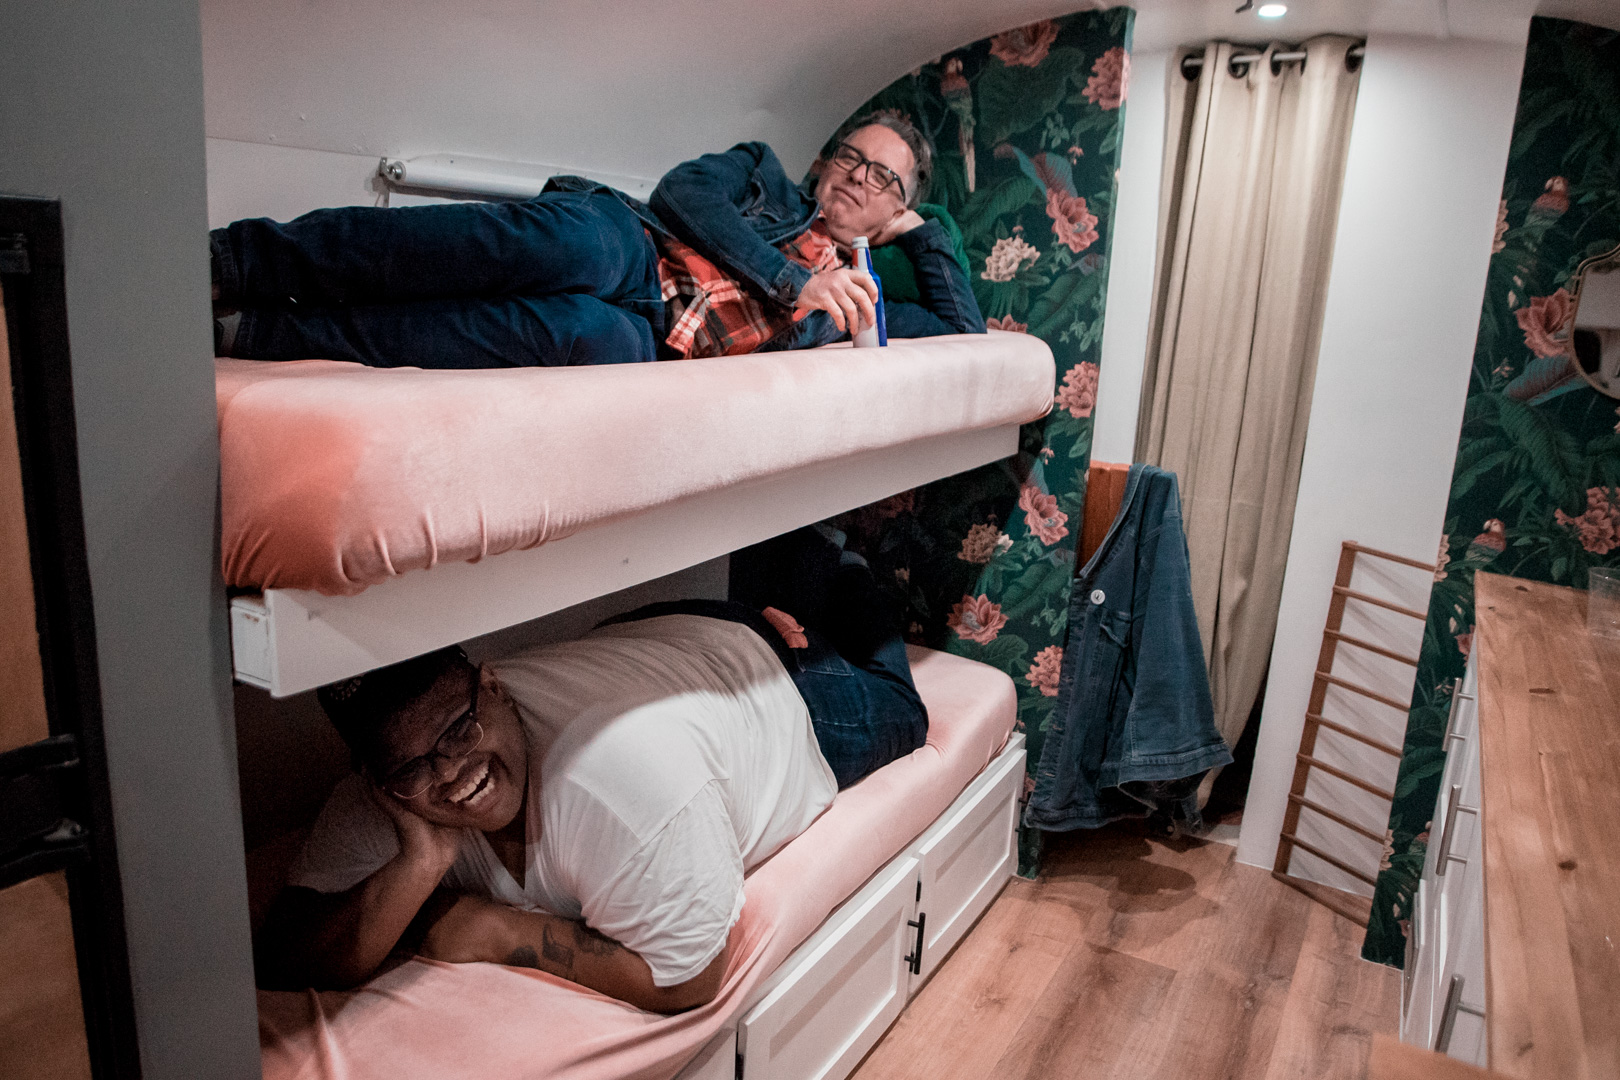 Two men lay on plush pink bunk beds inside of an airstream, smiling at the camera.